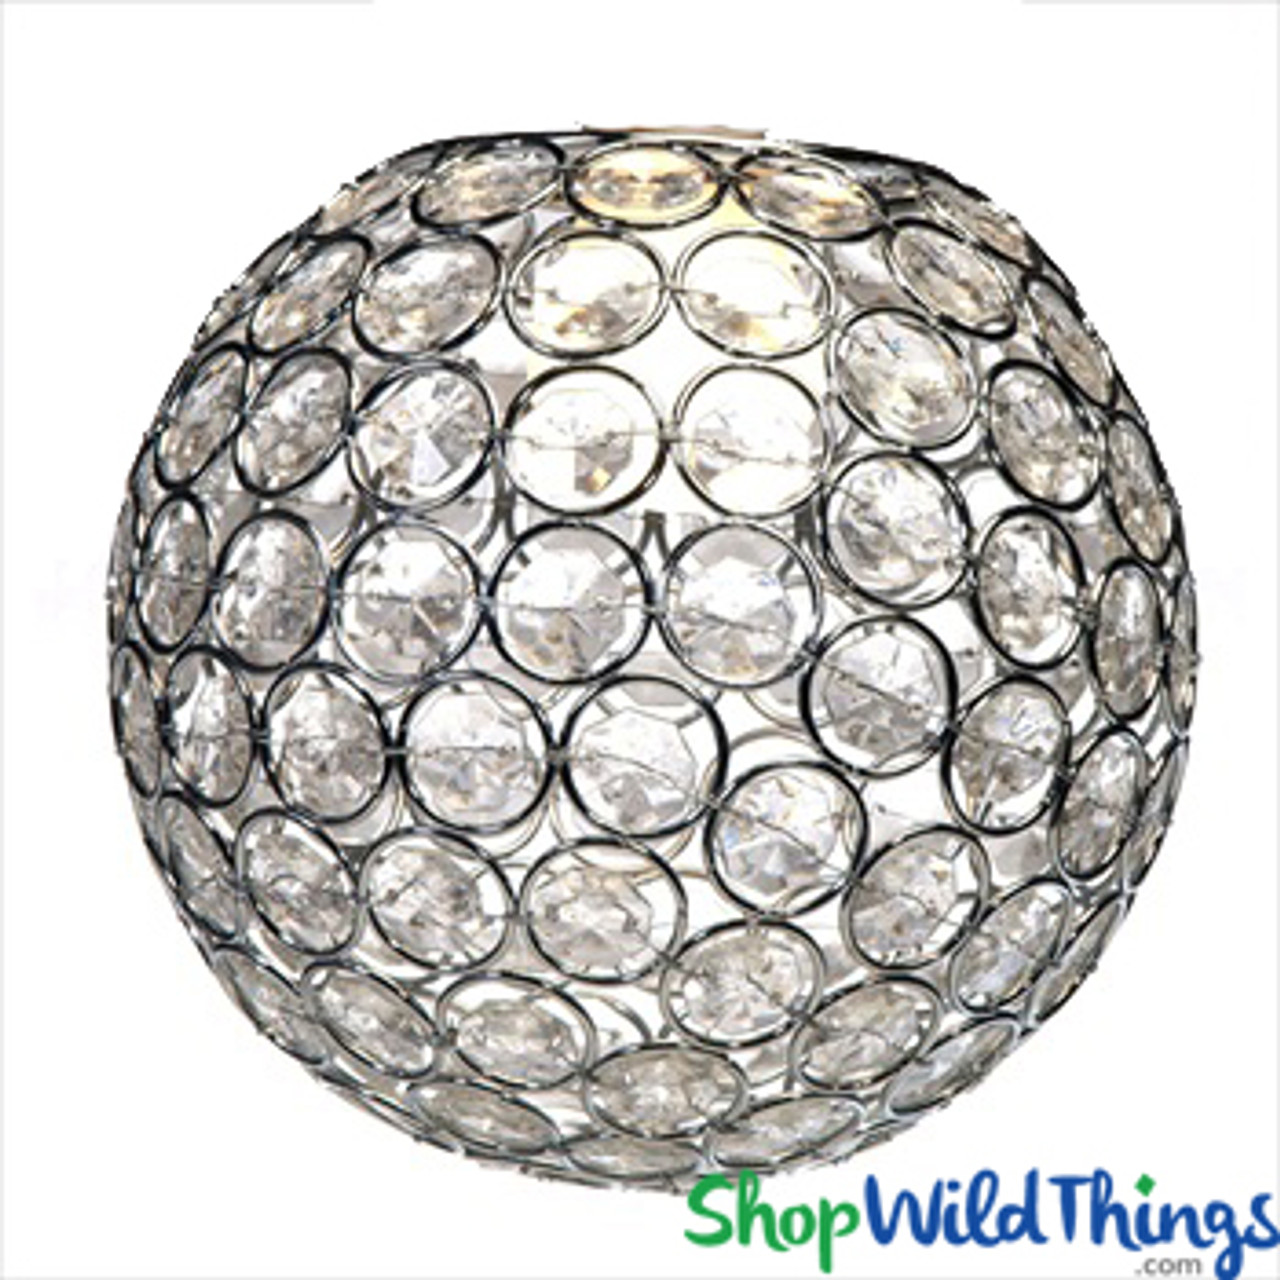 Crystal Ball Chandelier, Centerpiece, Vase or Lamp Topper - Silver 7" -  ShopWildThings.com